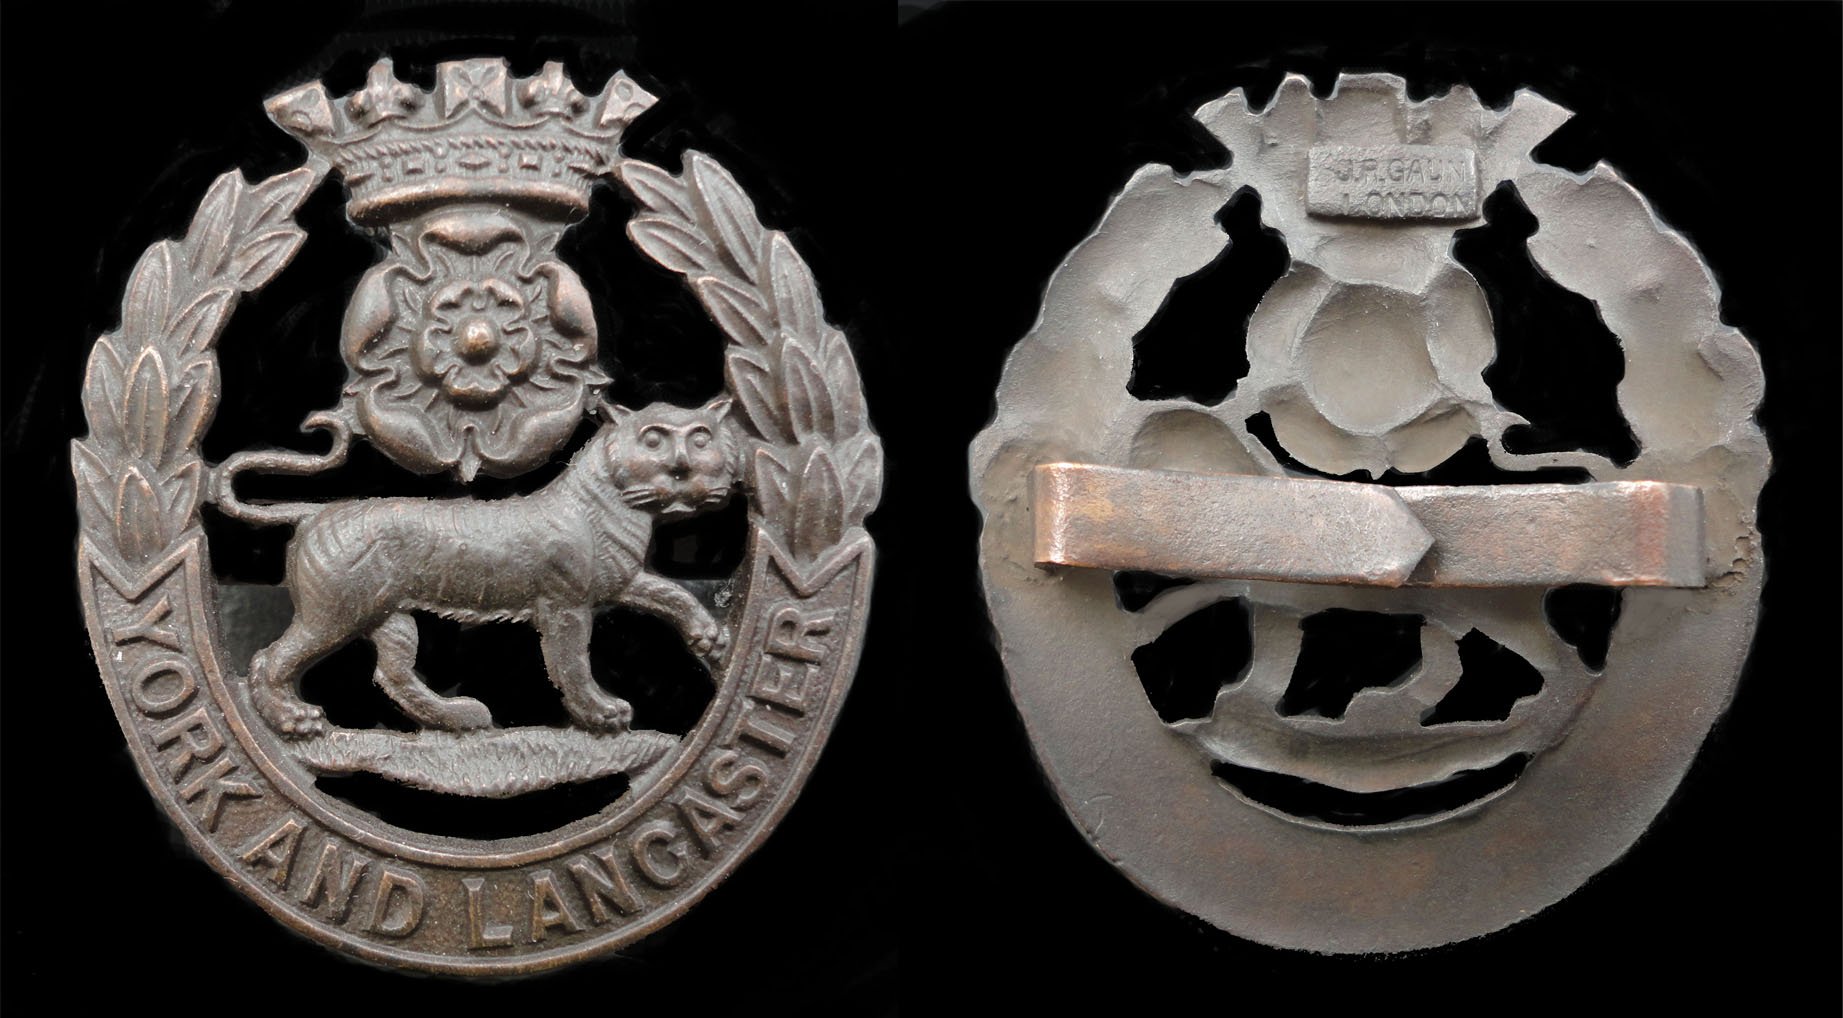 Officers Service Dress Badge with Right Facing Tiger. Gaunt Maker Marked